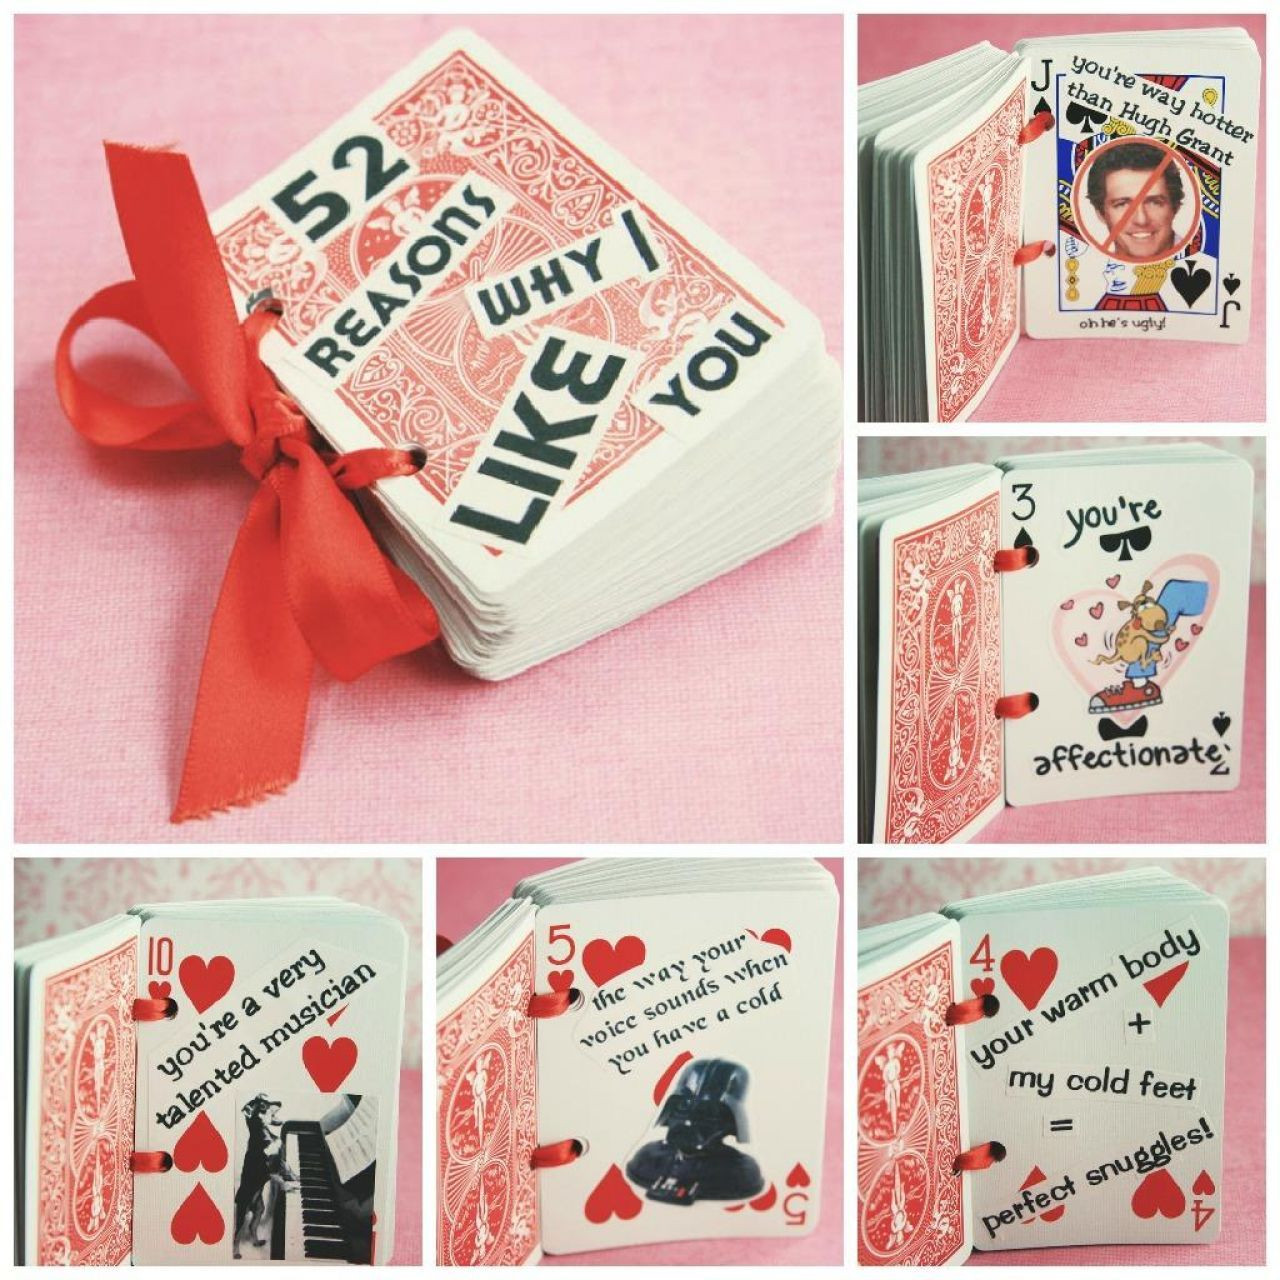 Last Minute Valentines Day Gift Ideas
 17 Last Minute Handmade Valentine Gifts for Him